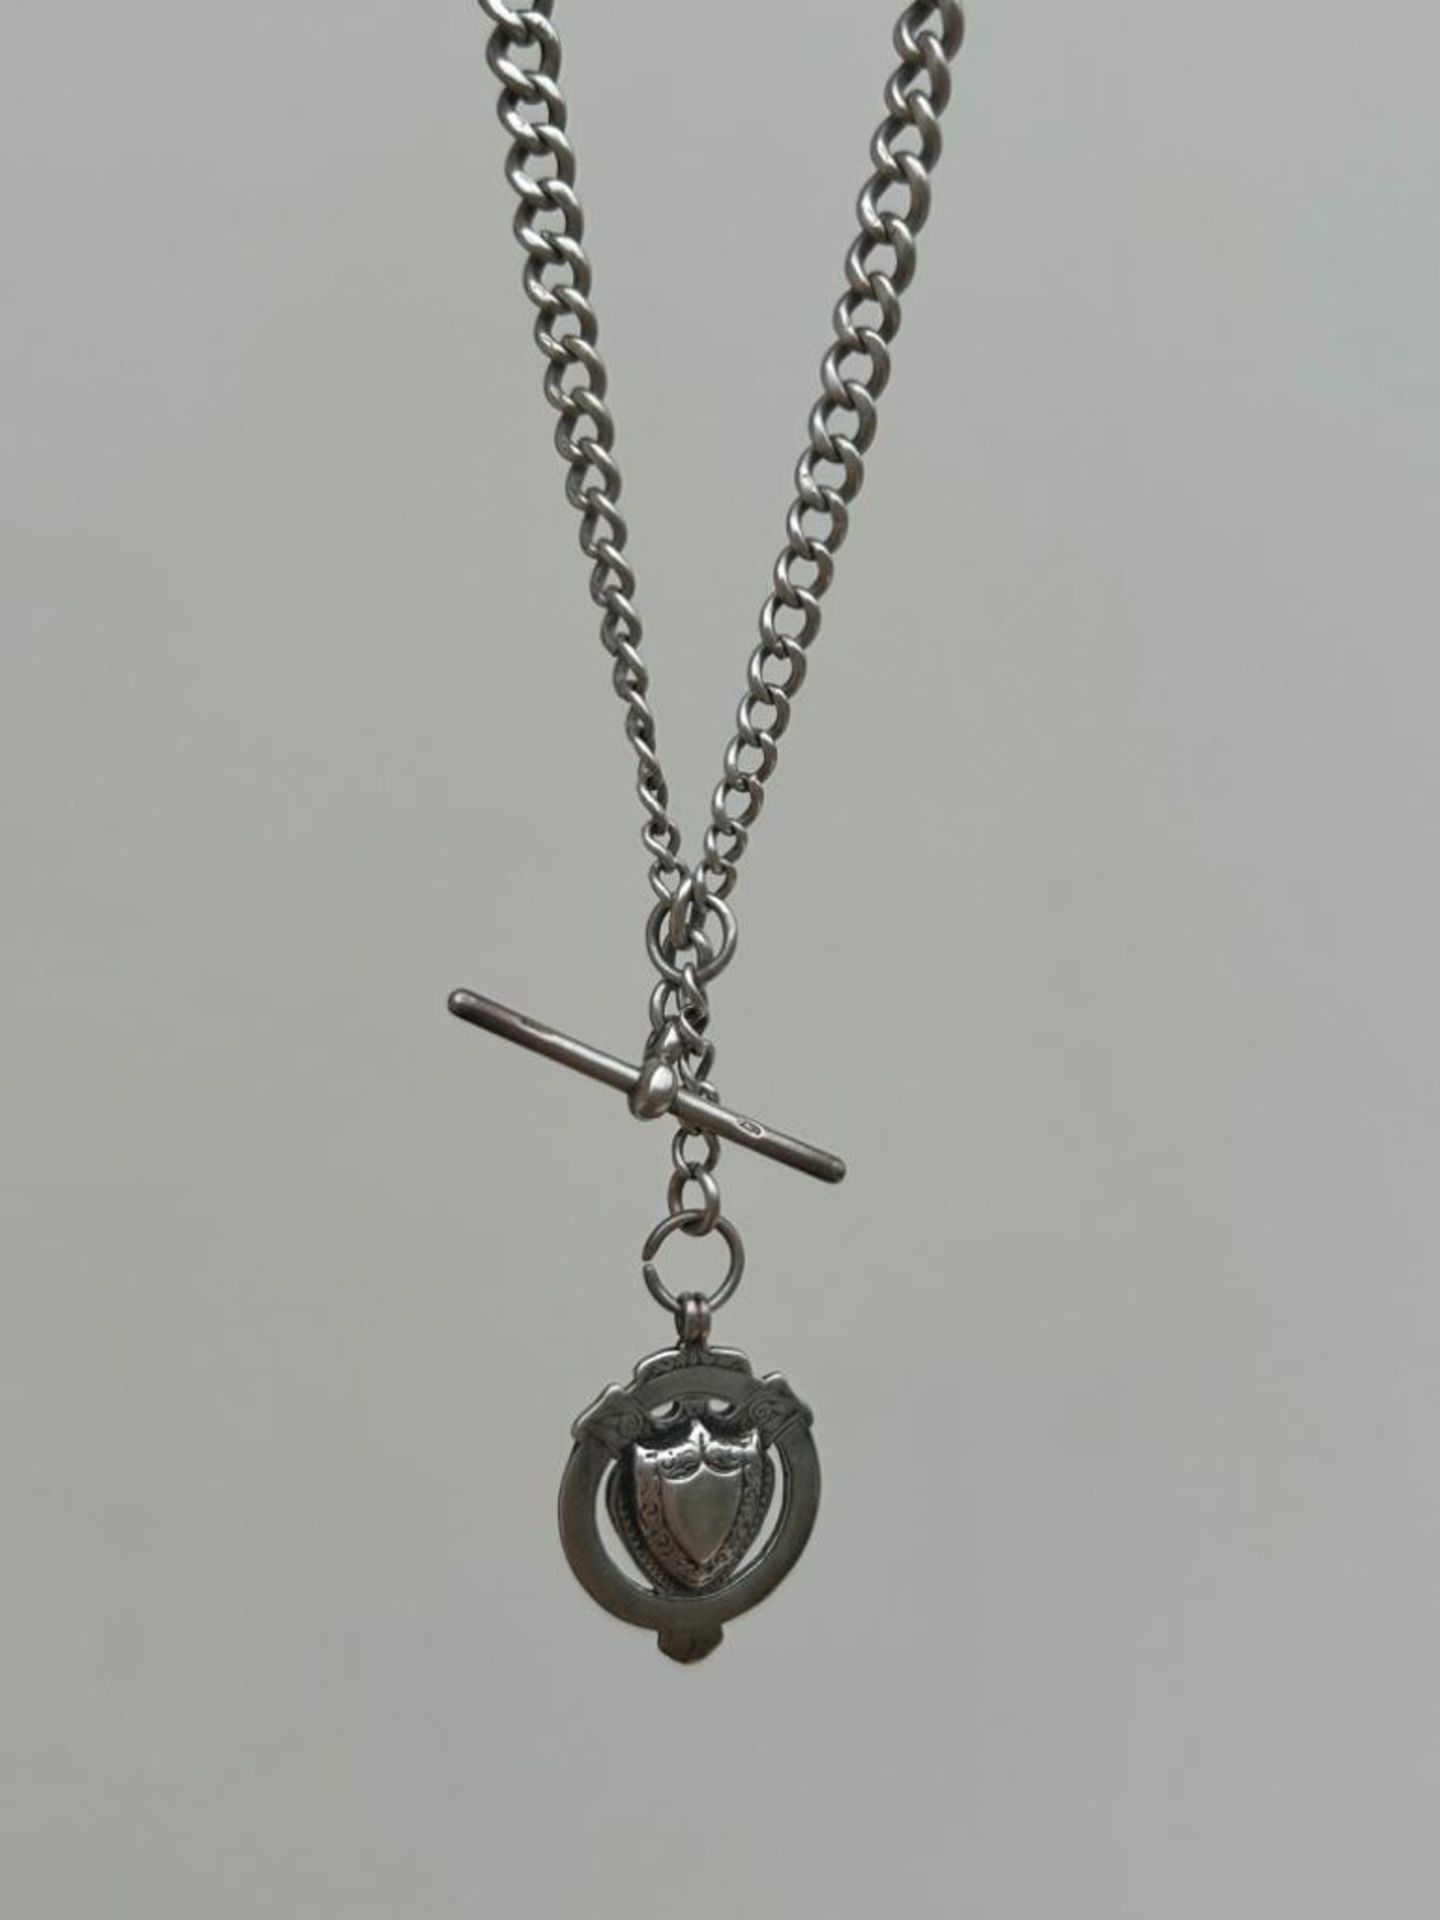 Antique Silver Double Albert Chain with Medal and TBar - Image 5 of 5